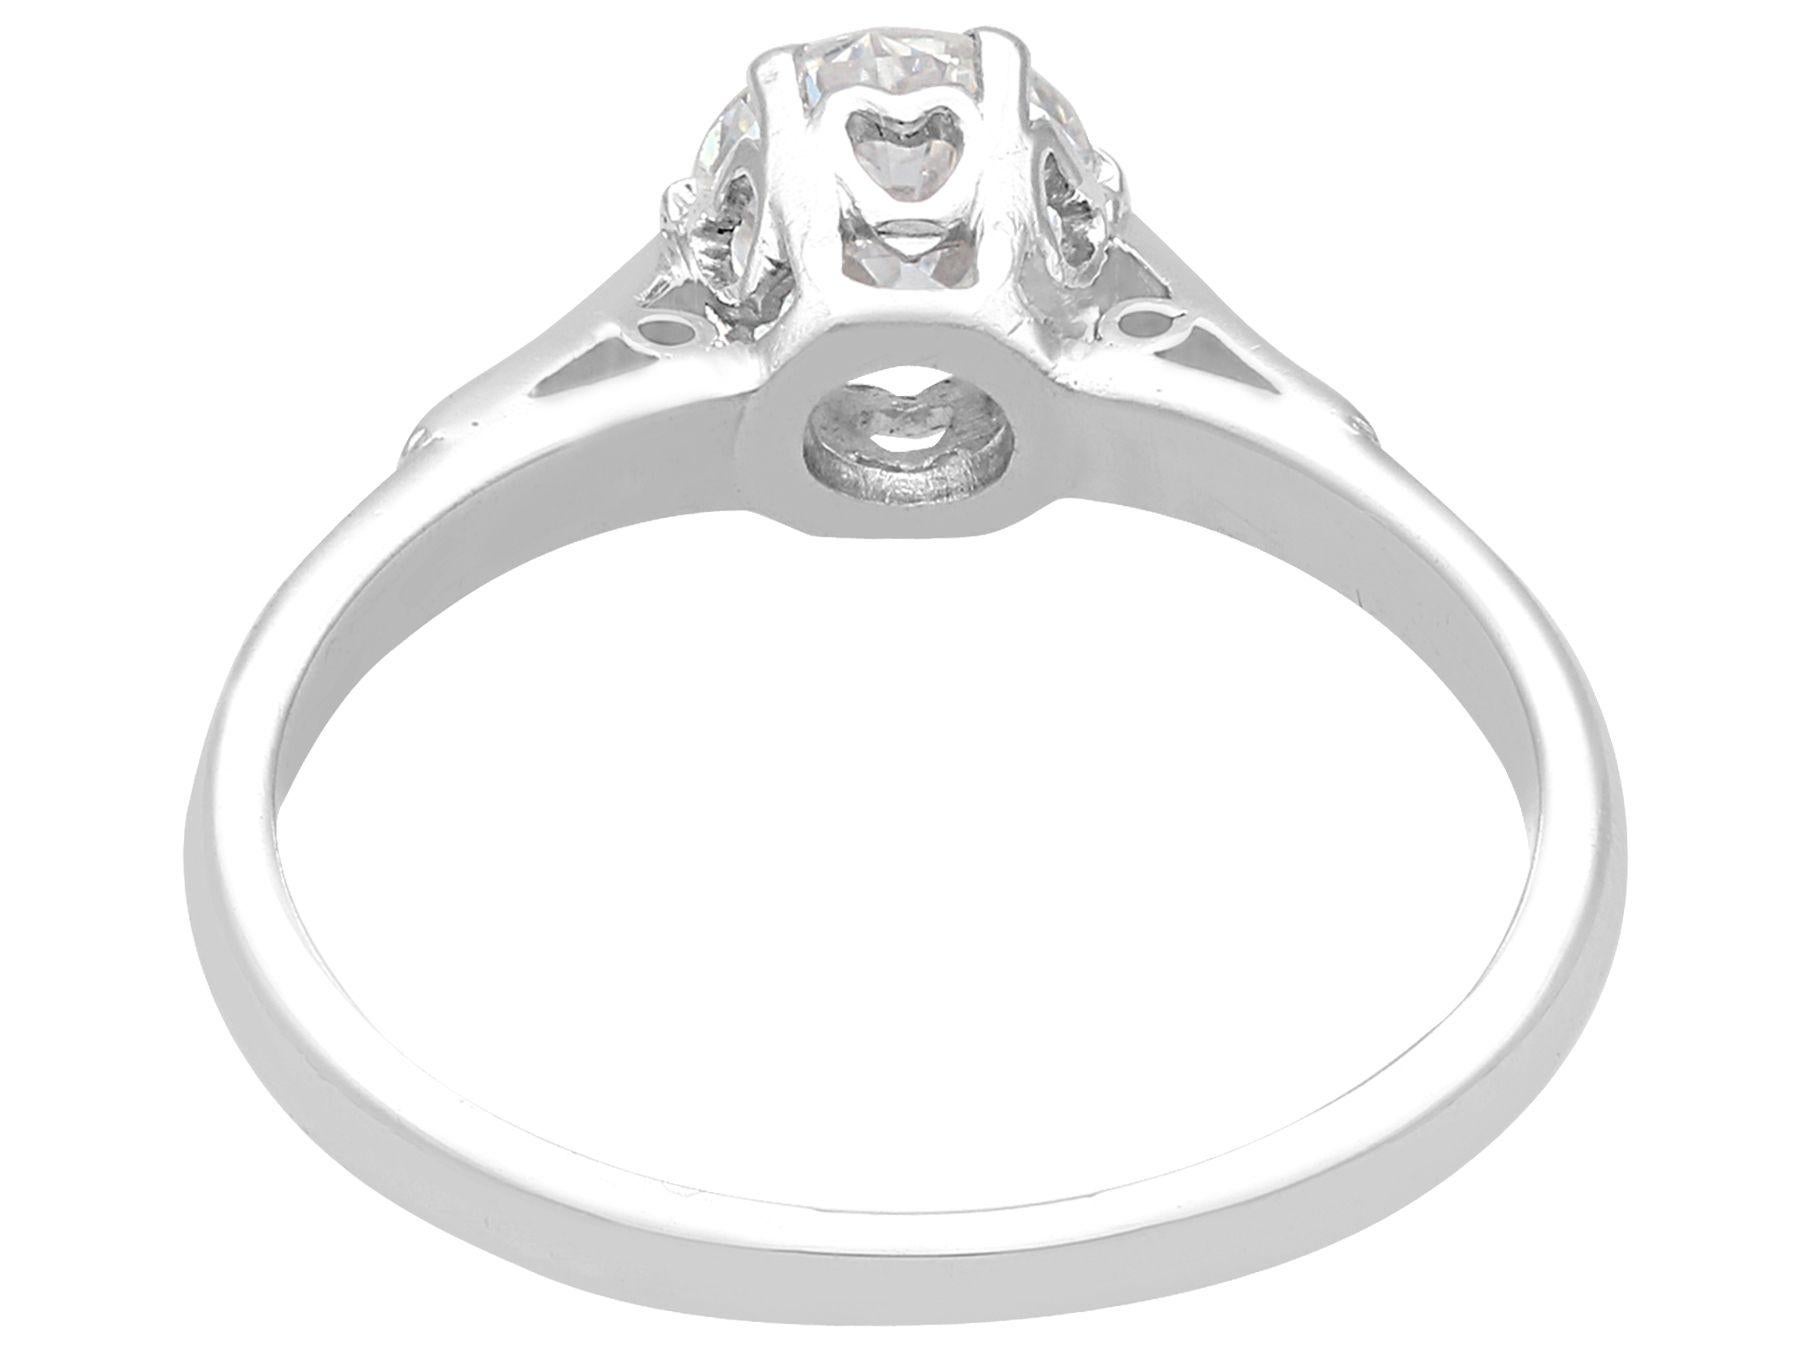 Women's or Men's Diamond and White Gold Solitaire Ring